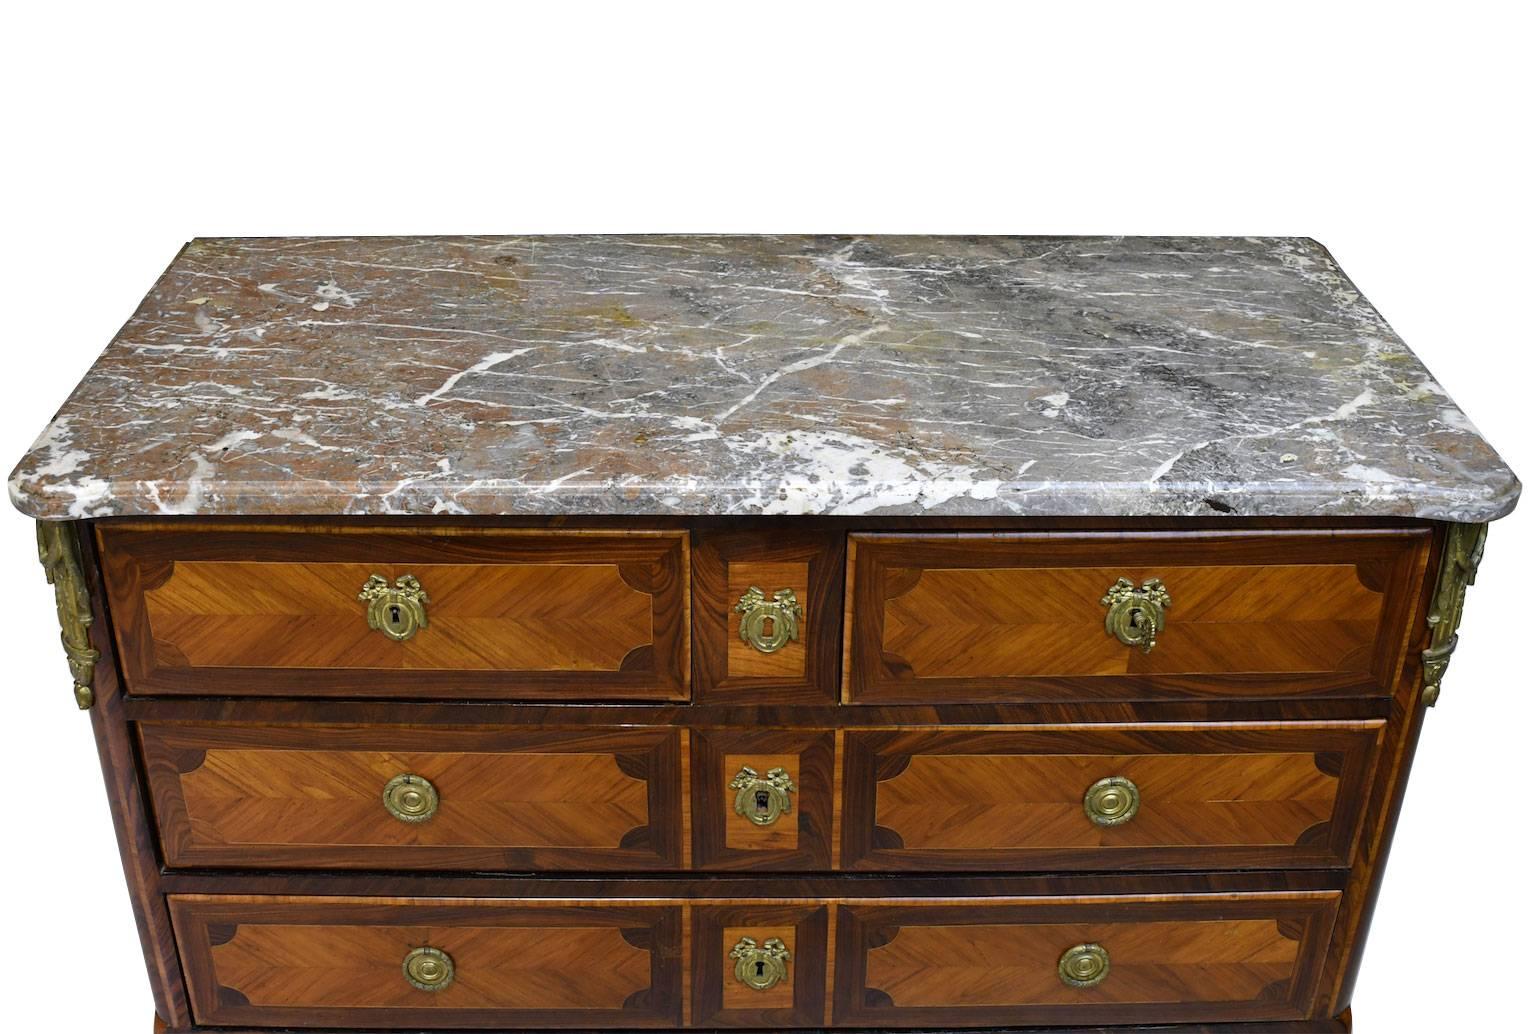 Cast Transitional Louis XV/ XVI Chest of Drawers with Marble Top, France, circa 1775